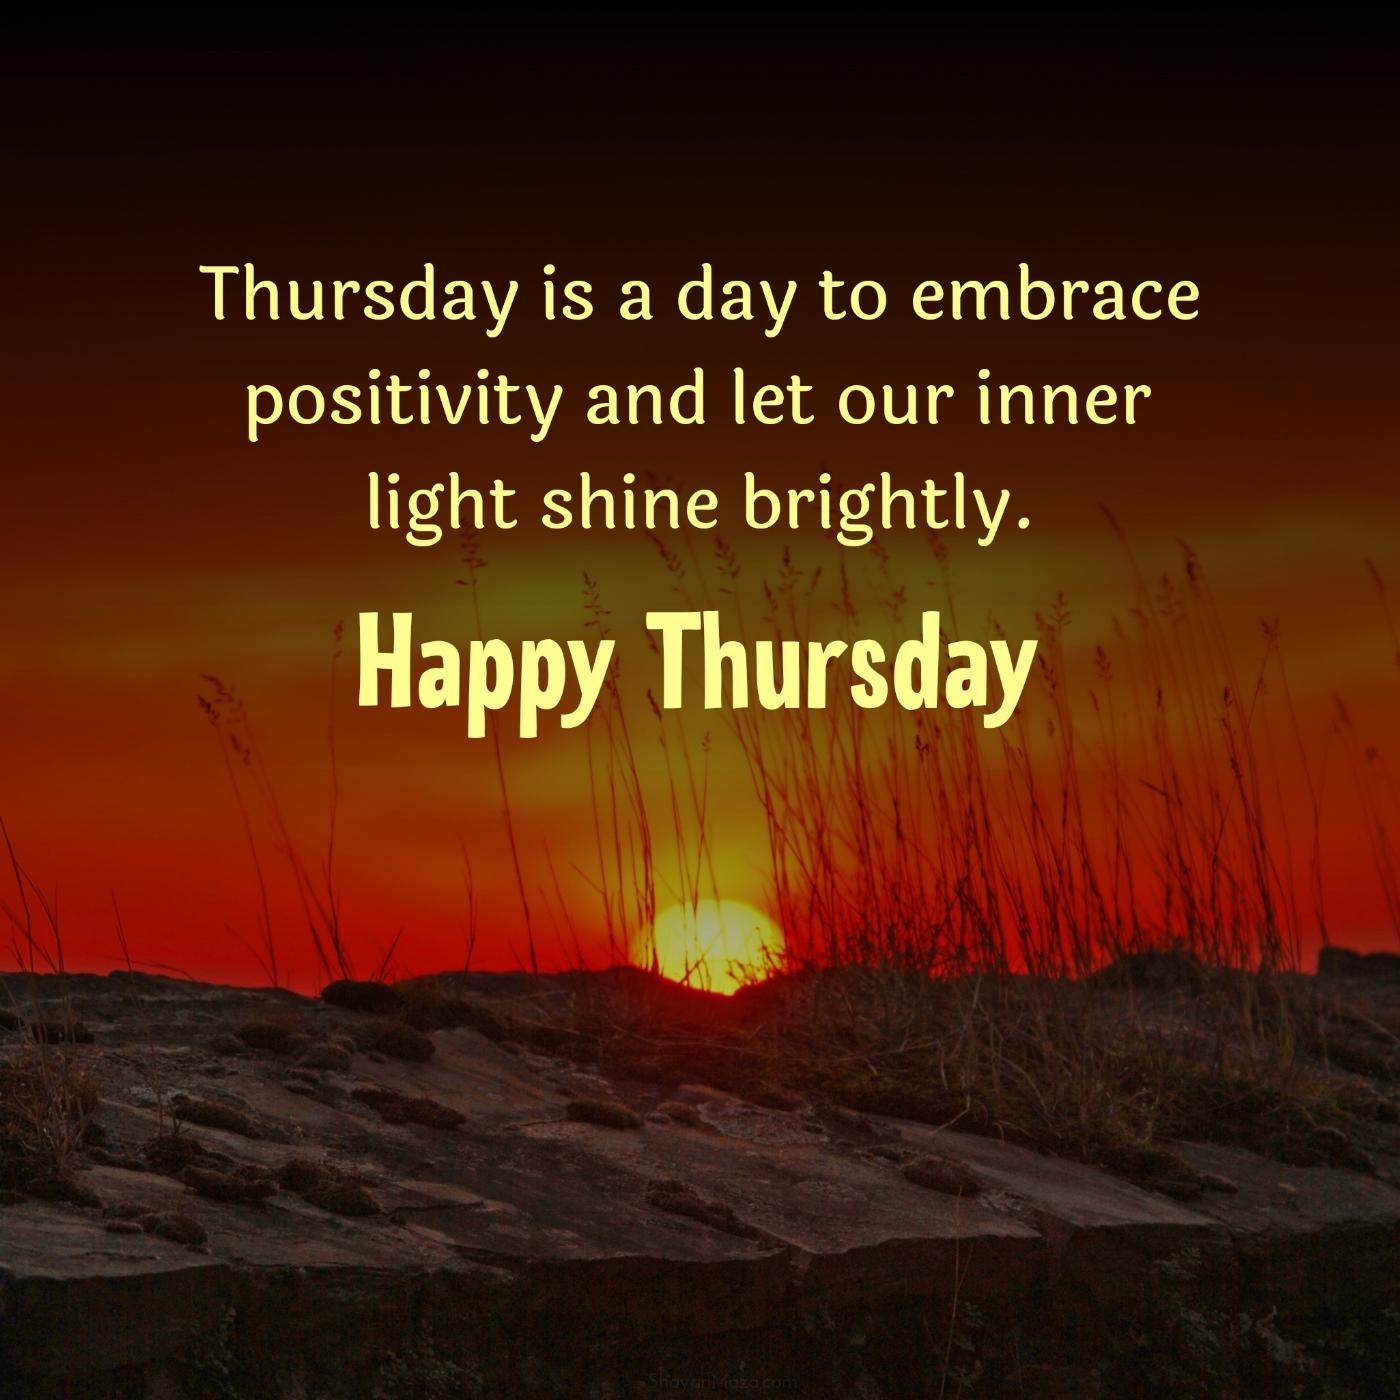 Thursday is a day to embrace positivity and let our inner light